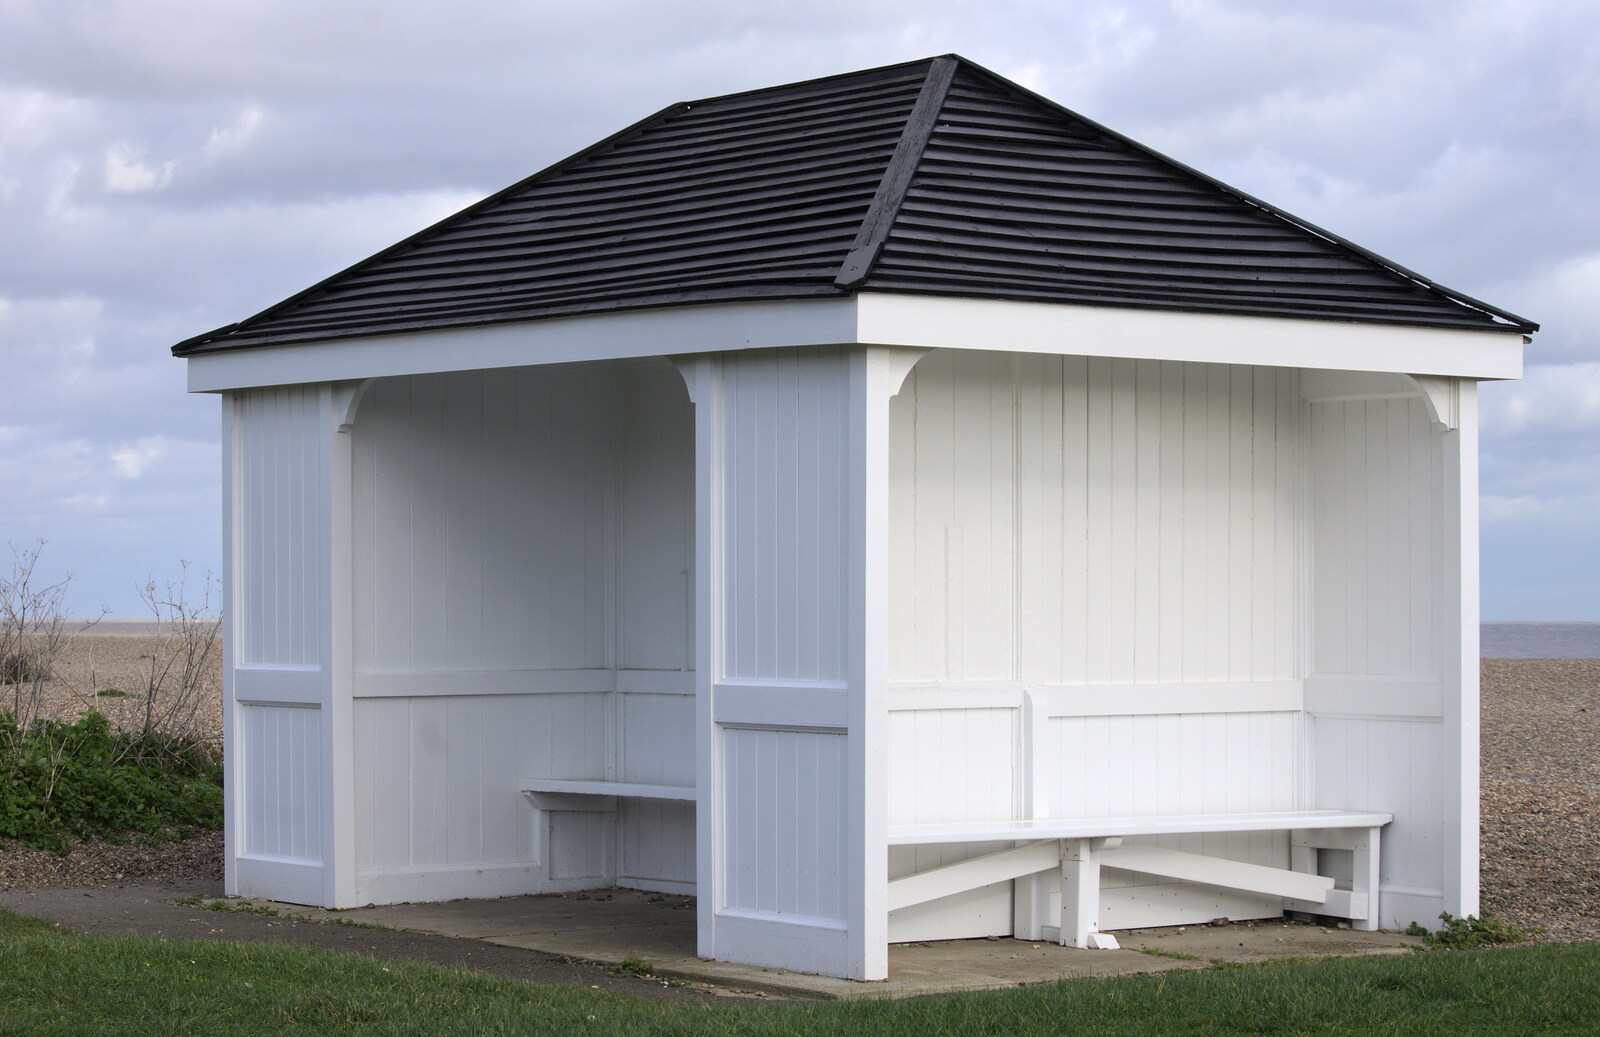 A seaside shelter from A Trip to Aldeburgh, Suffolk - 7th February 2016